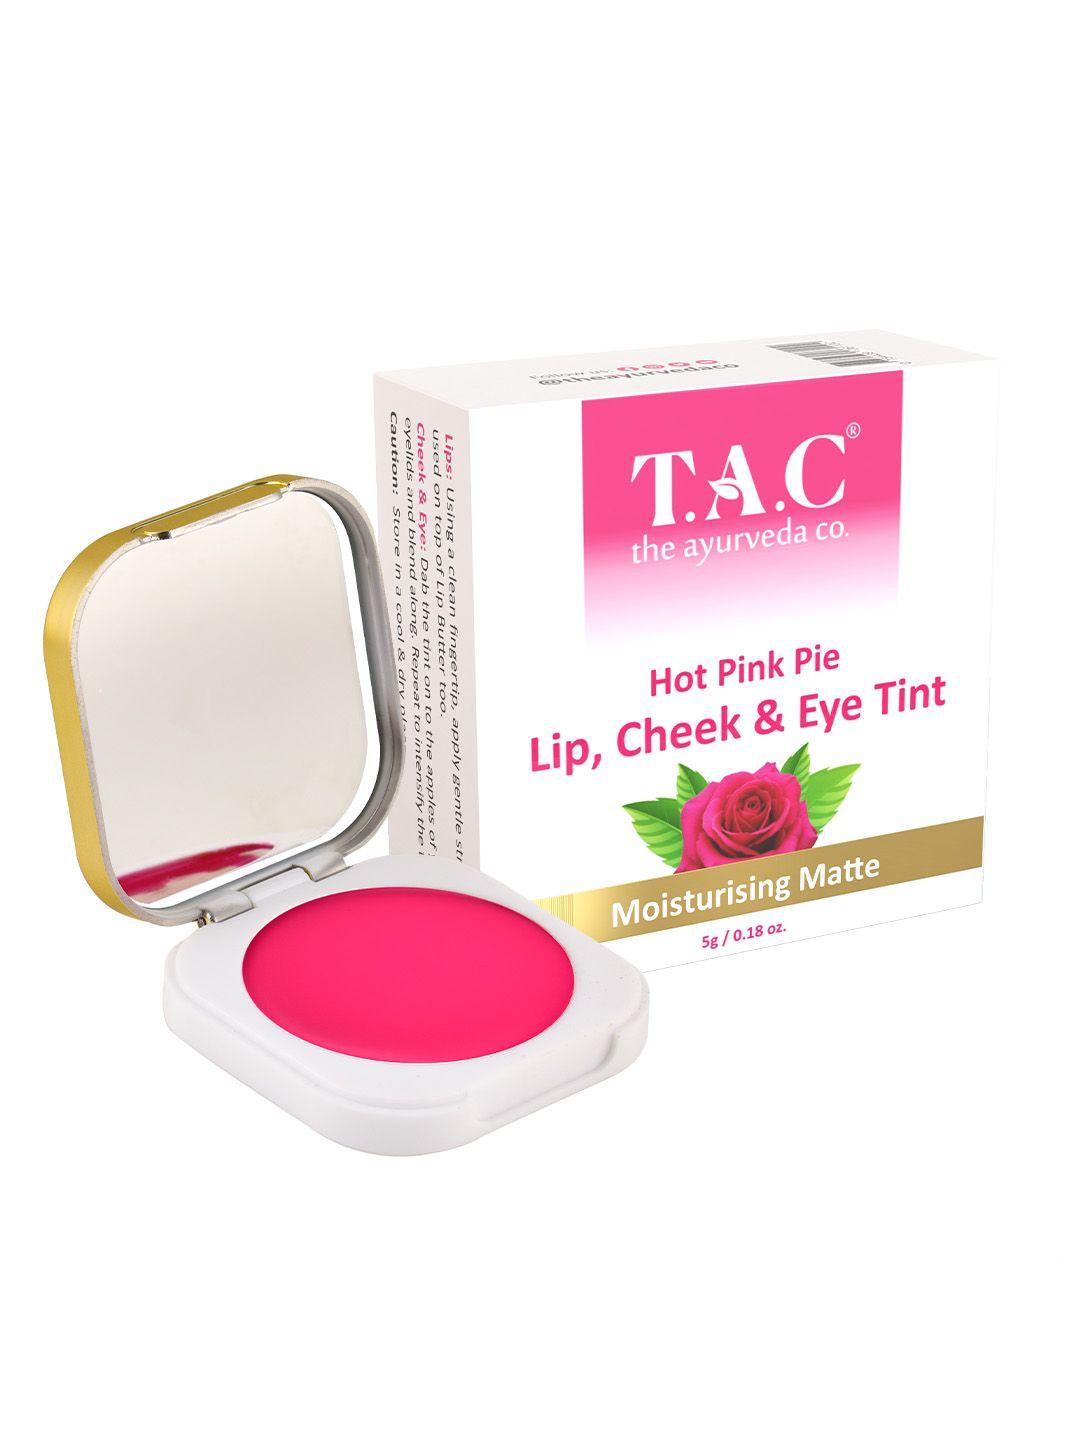 tac - the ayurveda co. lip & cheek tint with shea butter - hot pink